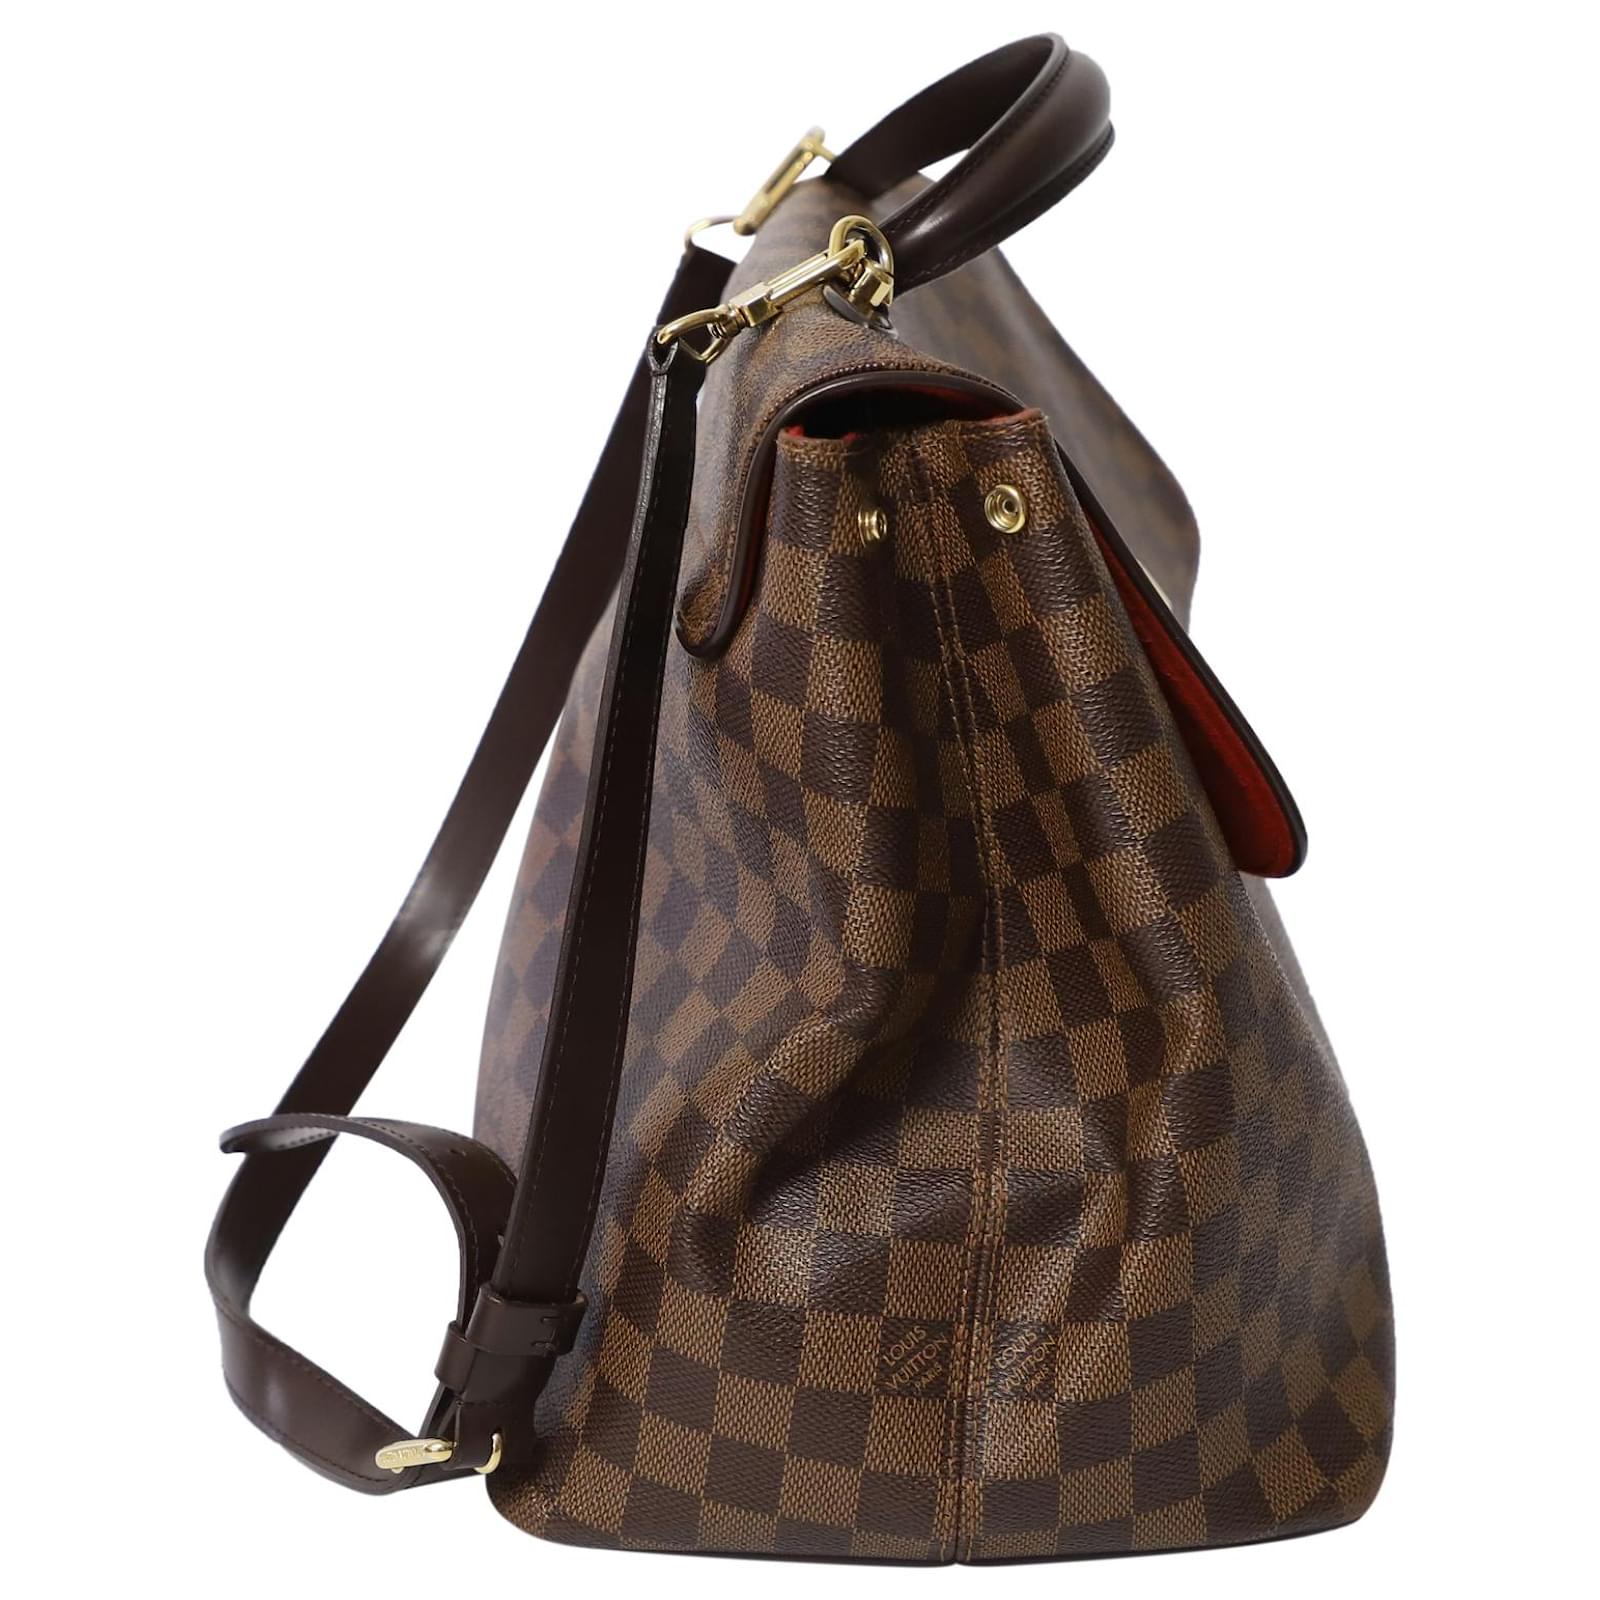 Louis Vuitton Damier Ebene Bergamo Bag in Brown Coated Canvas and